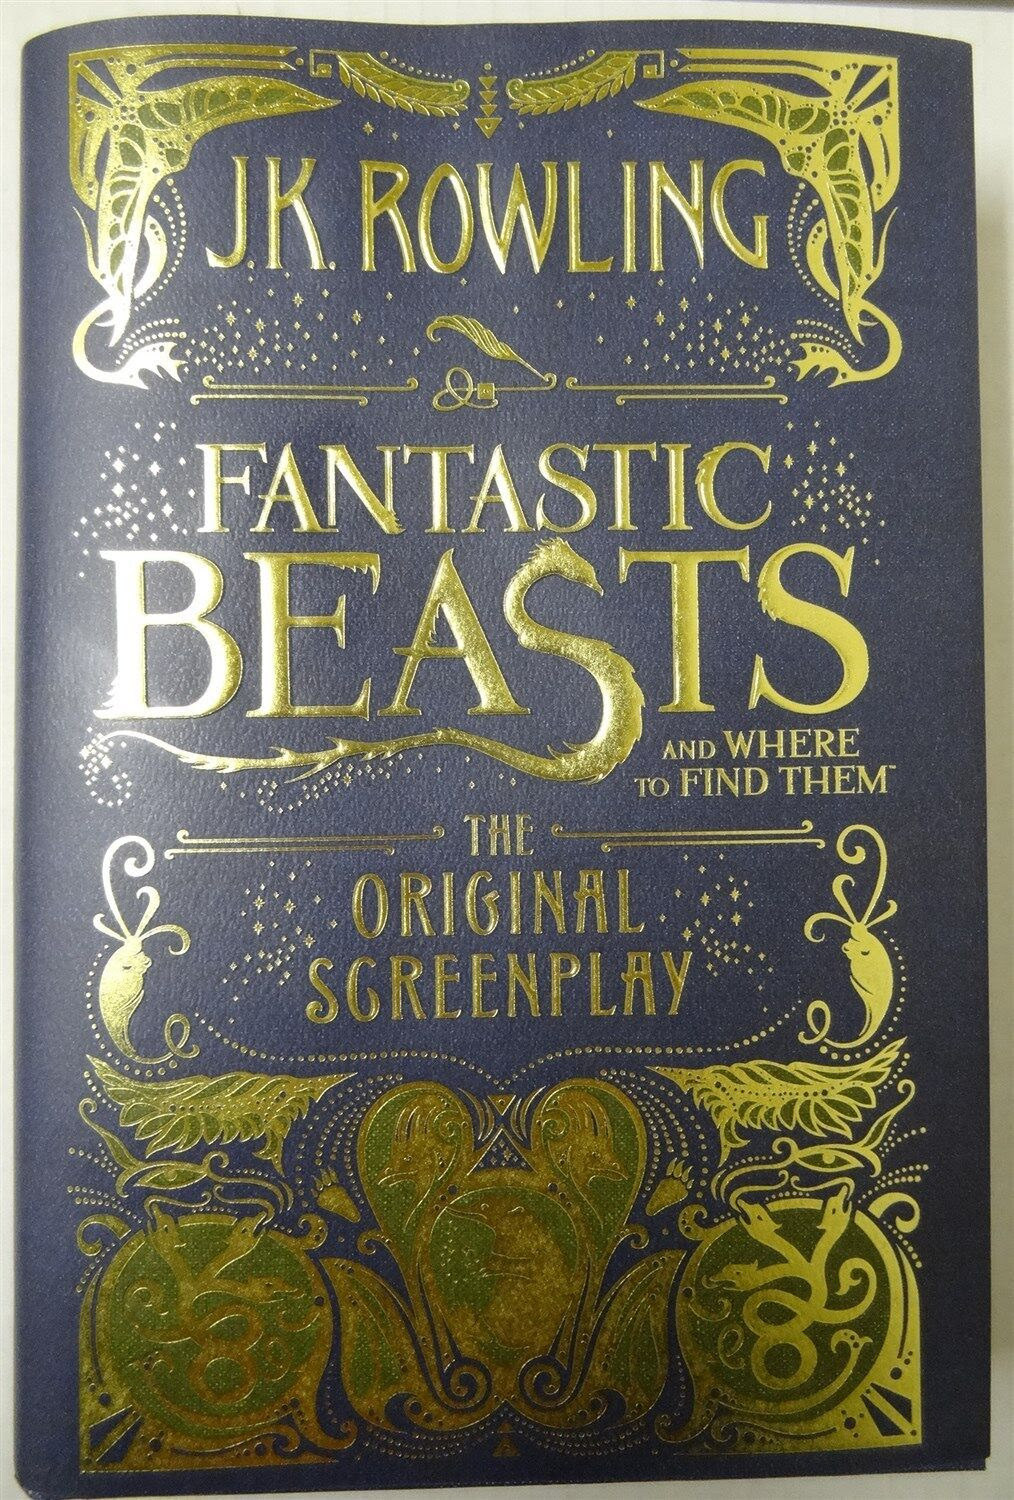 Fantastic Beasts and Where to Find Them The Original Screenplay
Epub-Ebook